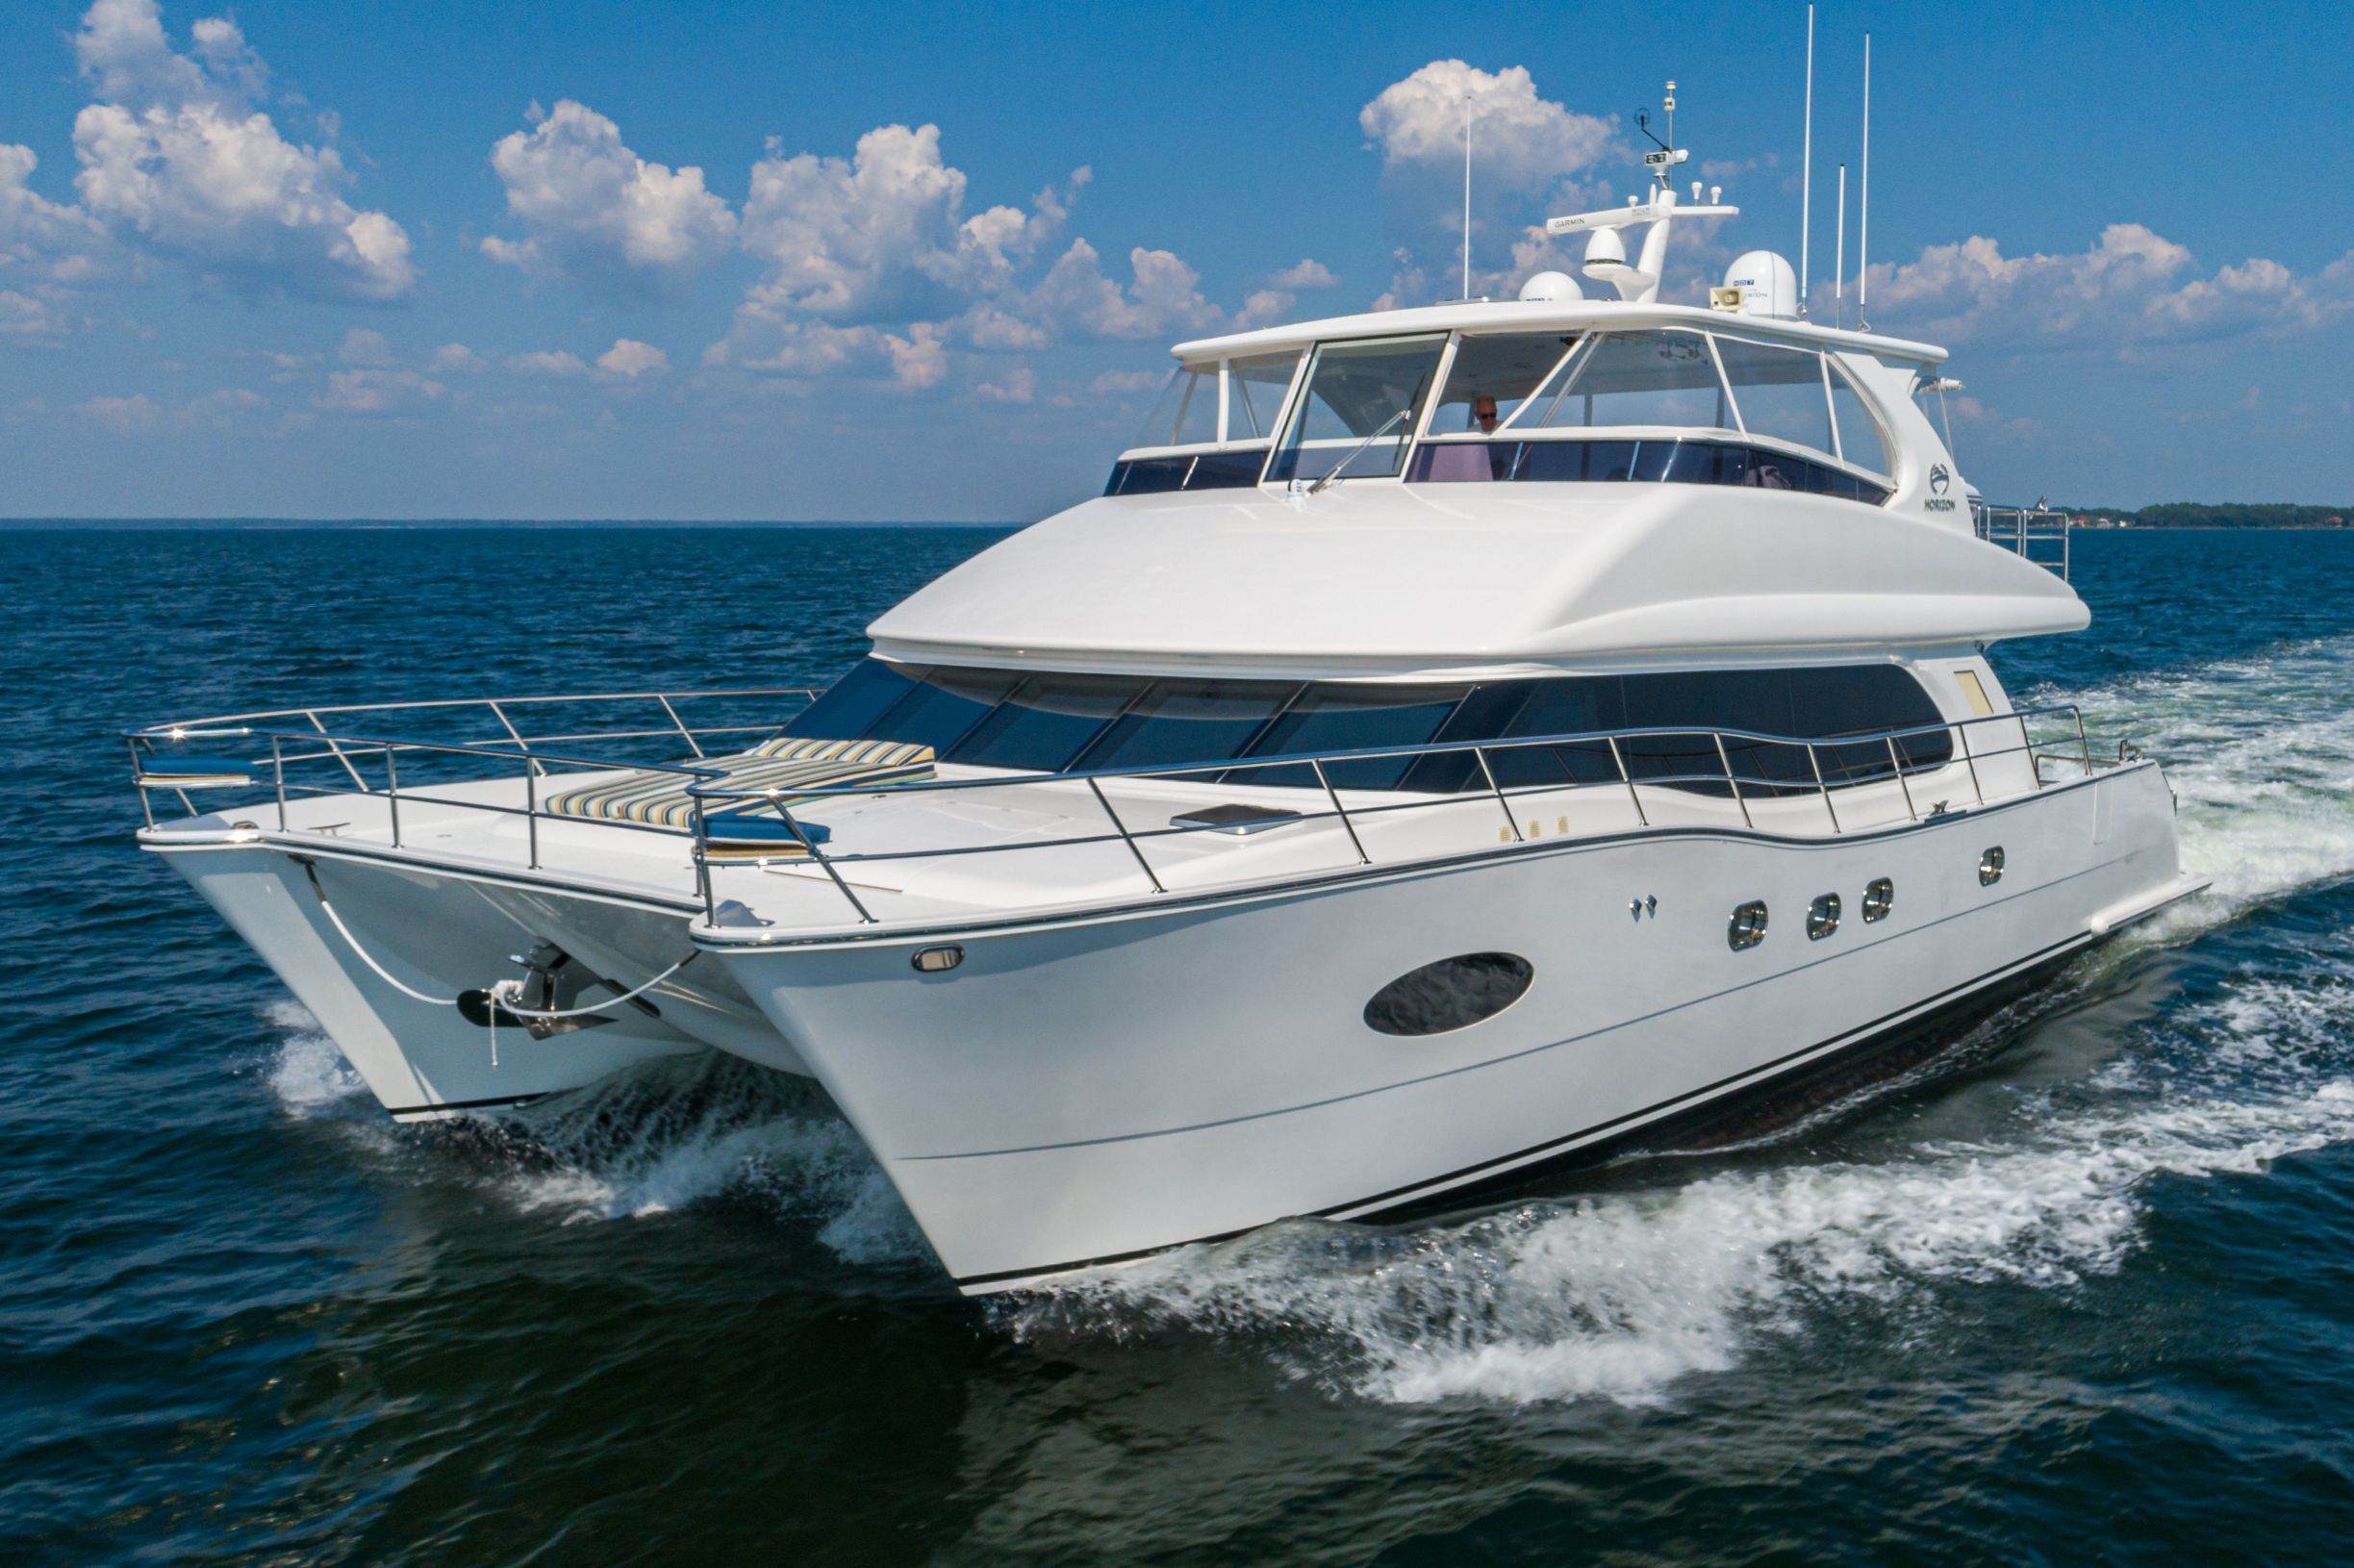 See Sundance at the Fort Lauderdale Boat show